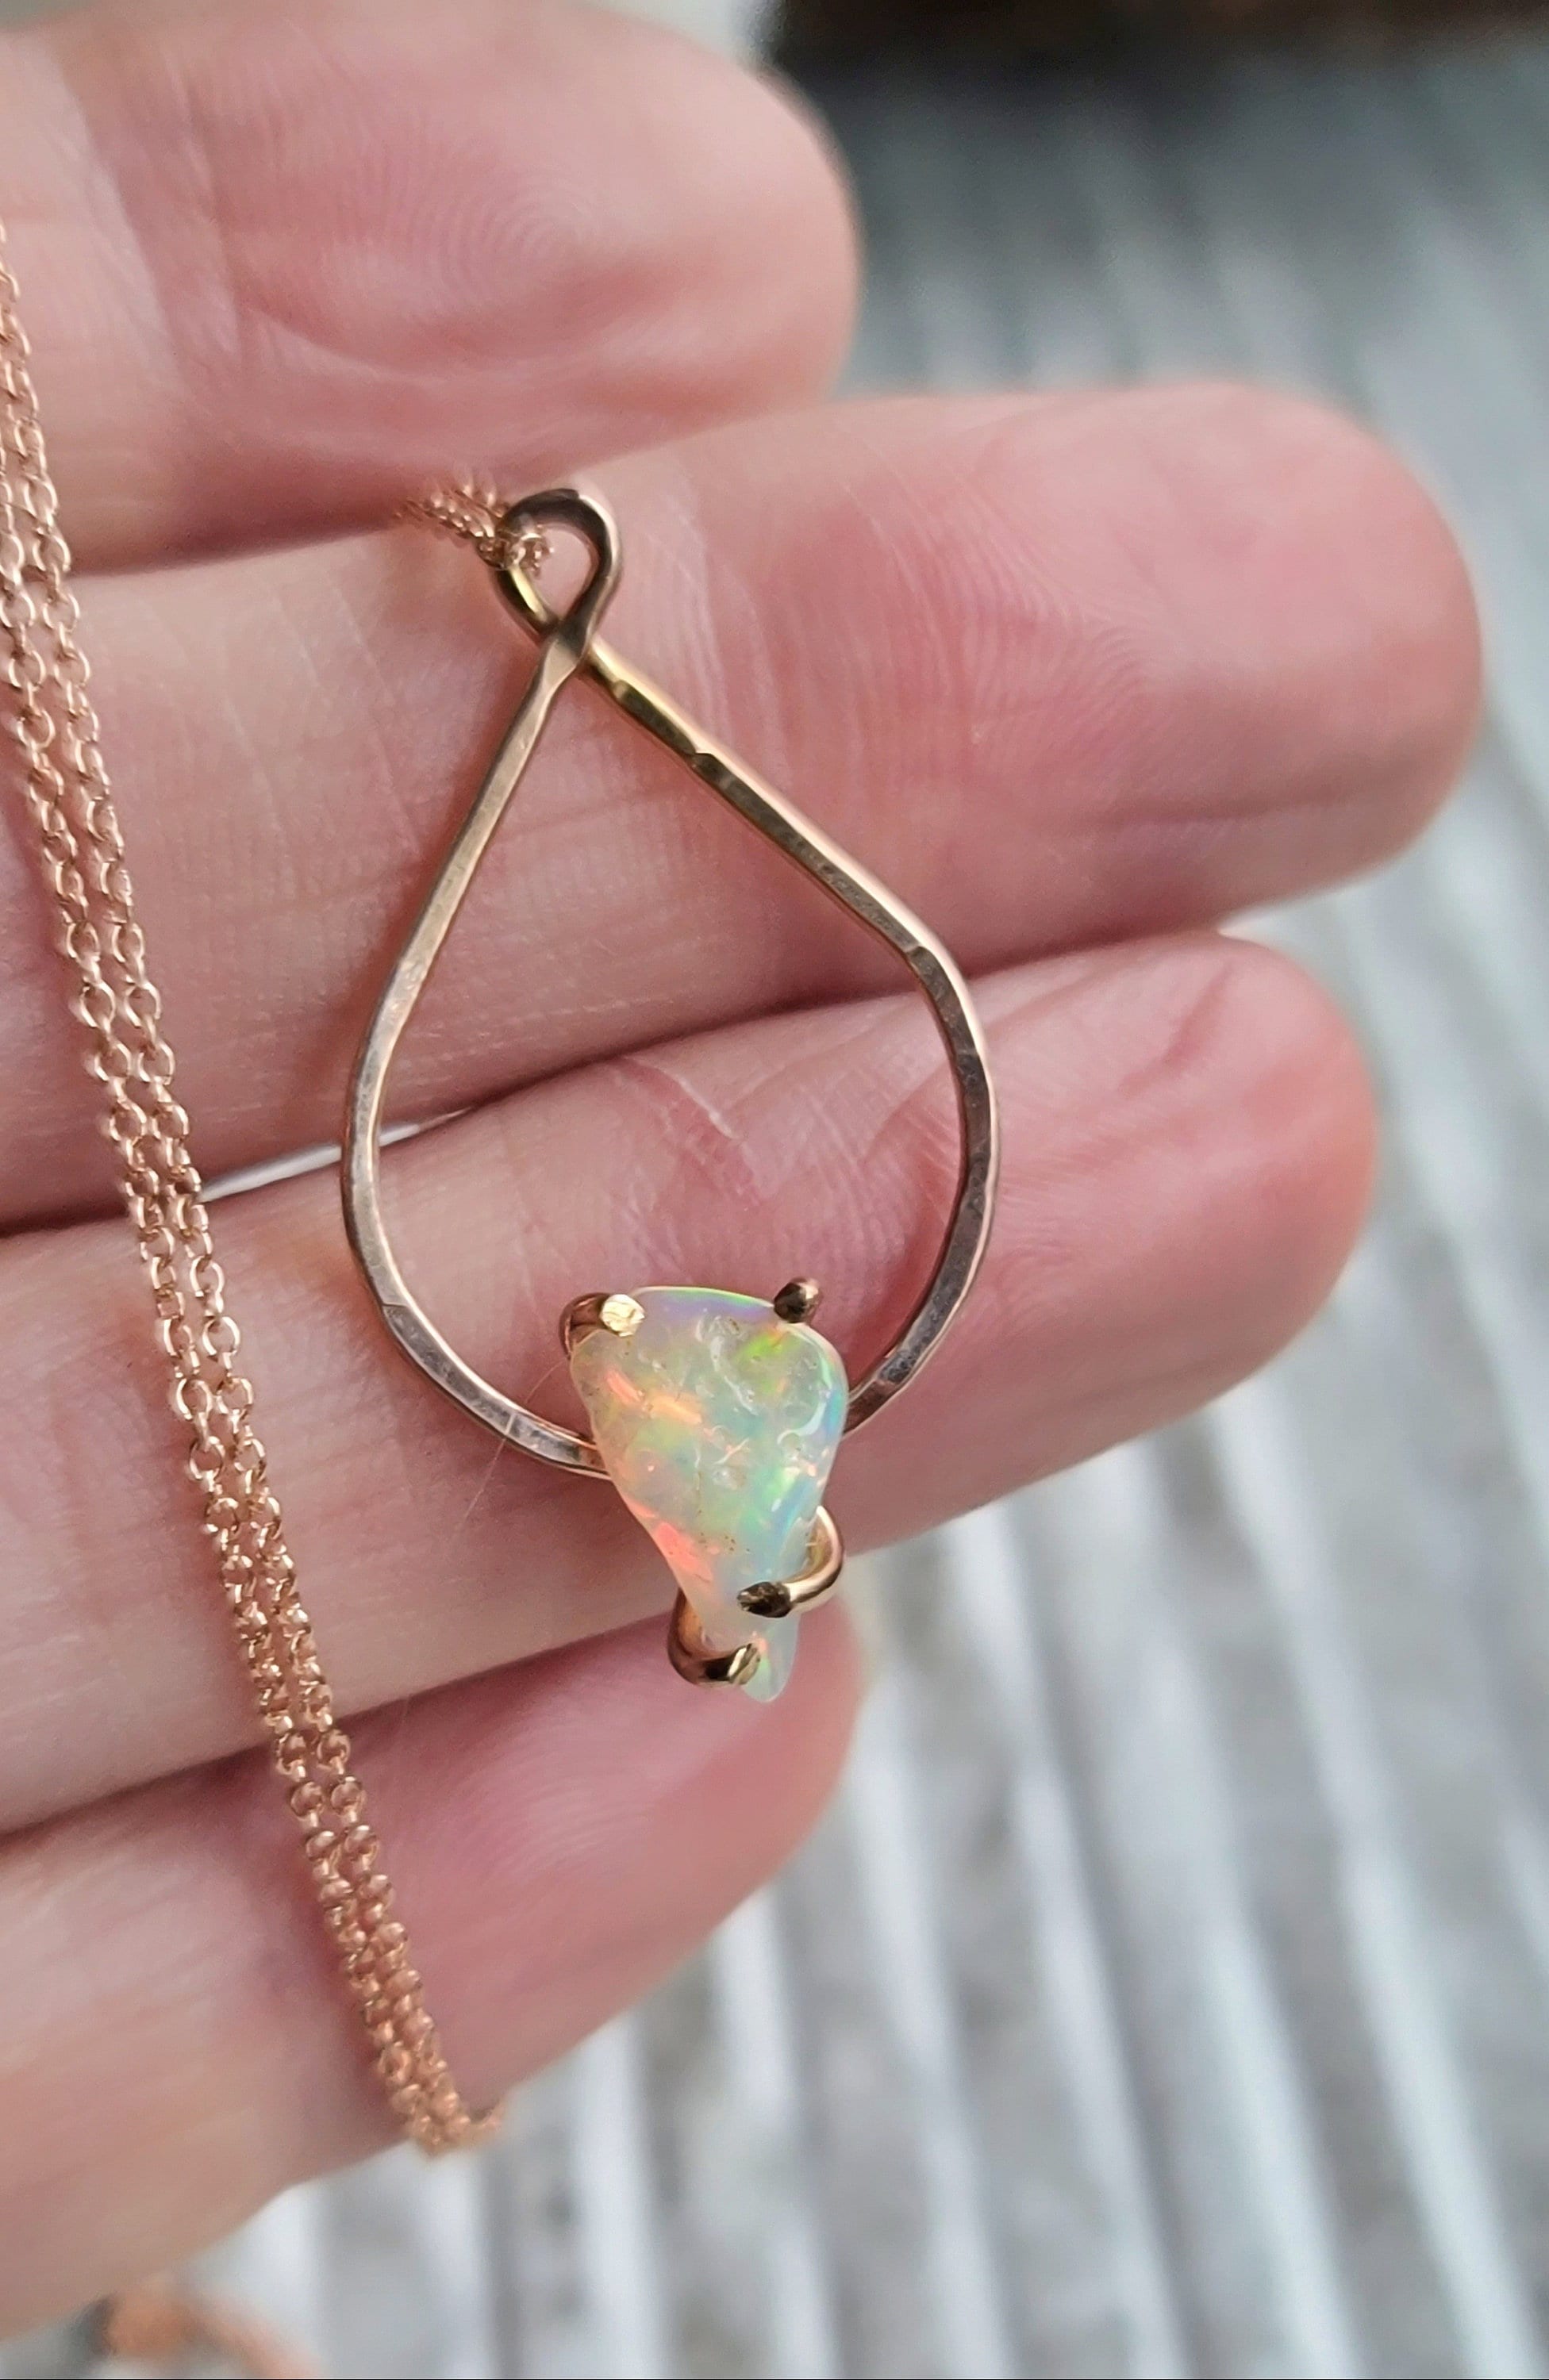 Fire Opal Pendant in 14K Rose Gold Fill, Infinity Jewelry in Pink Gold 18" Cable Chain, Welo Fire Opal in Natural Shape, October Birthstone